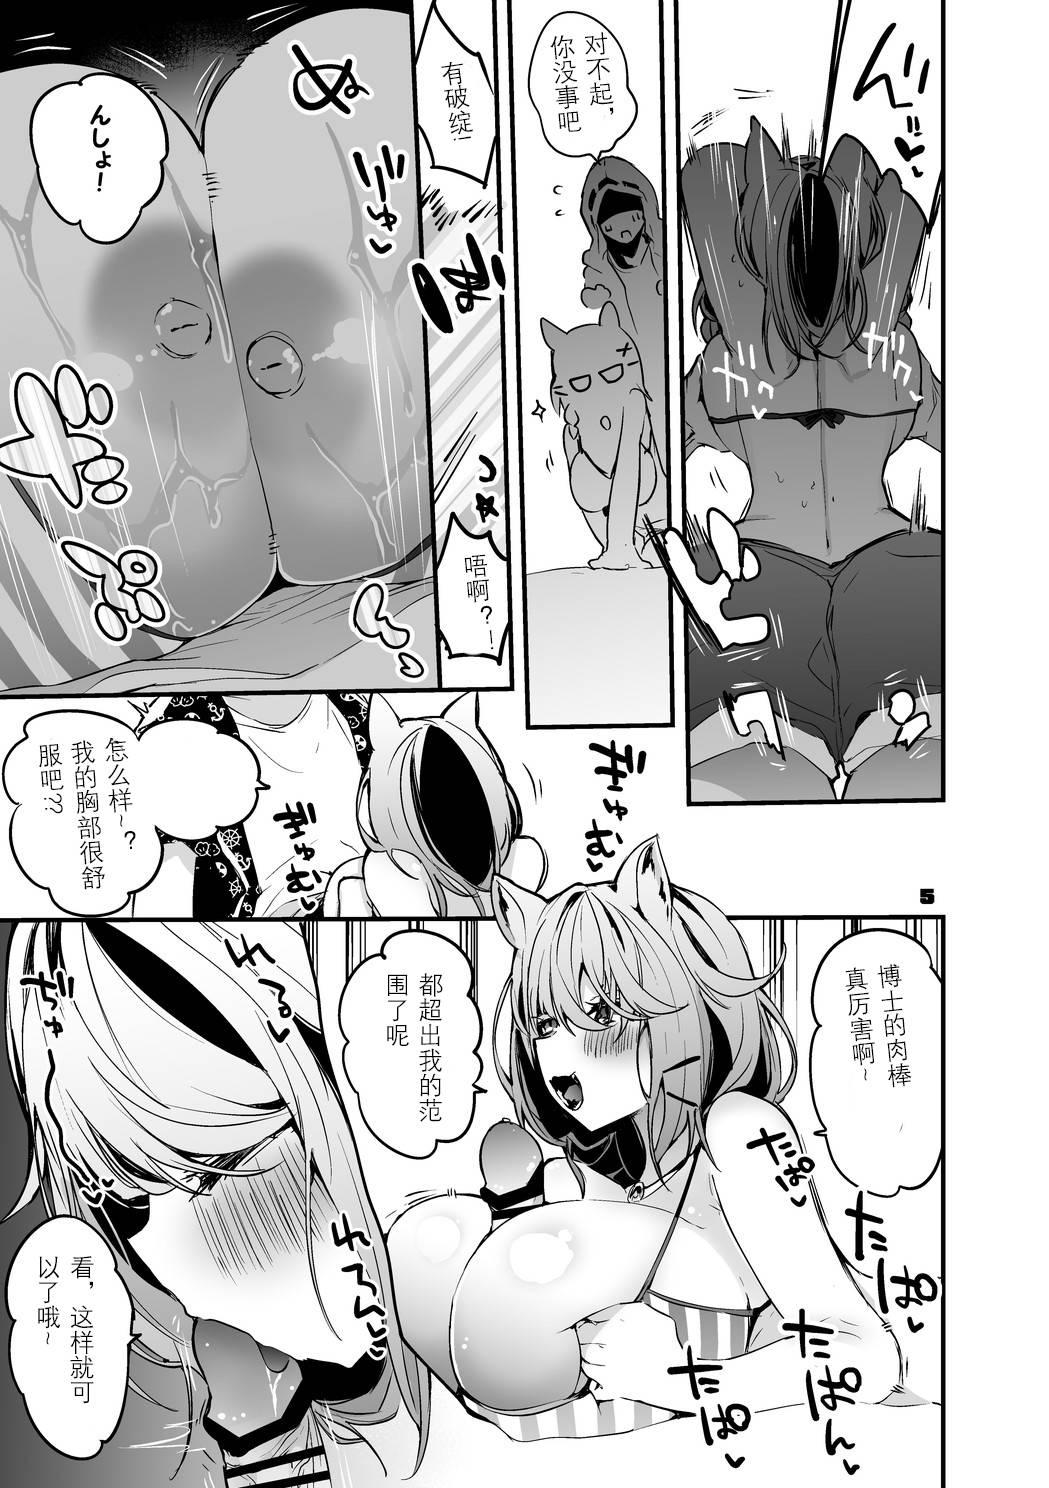 Sex Pussy Hakobune x Ero x Matome Hon 2 Ch. 1-2, 7 | りんごくらぶ的方舟x工口x总集篇 - Arknights Spandex - Page 5